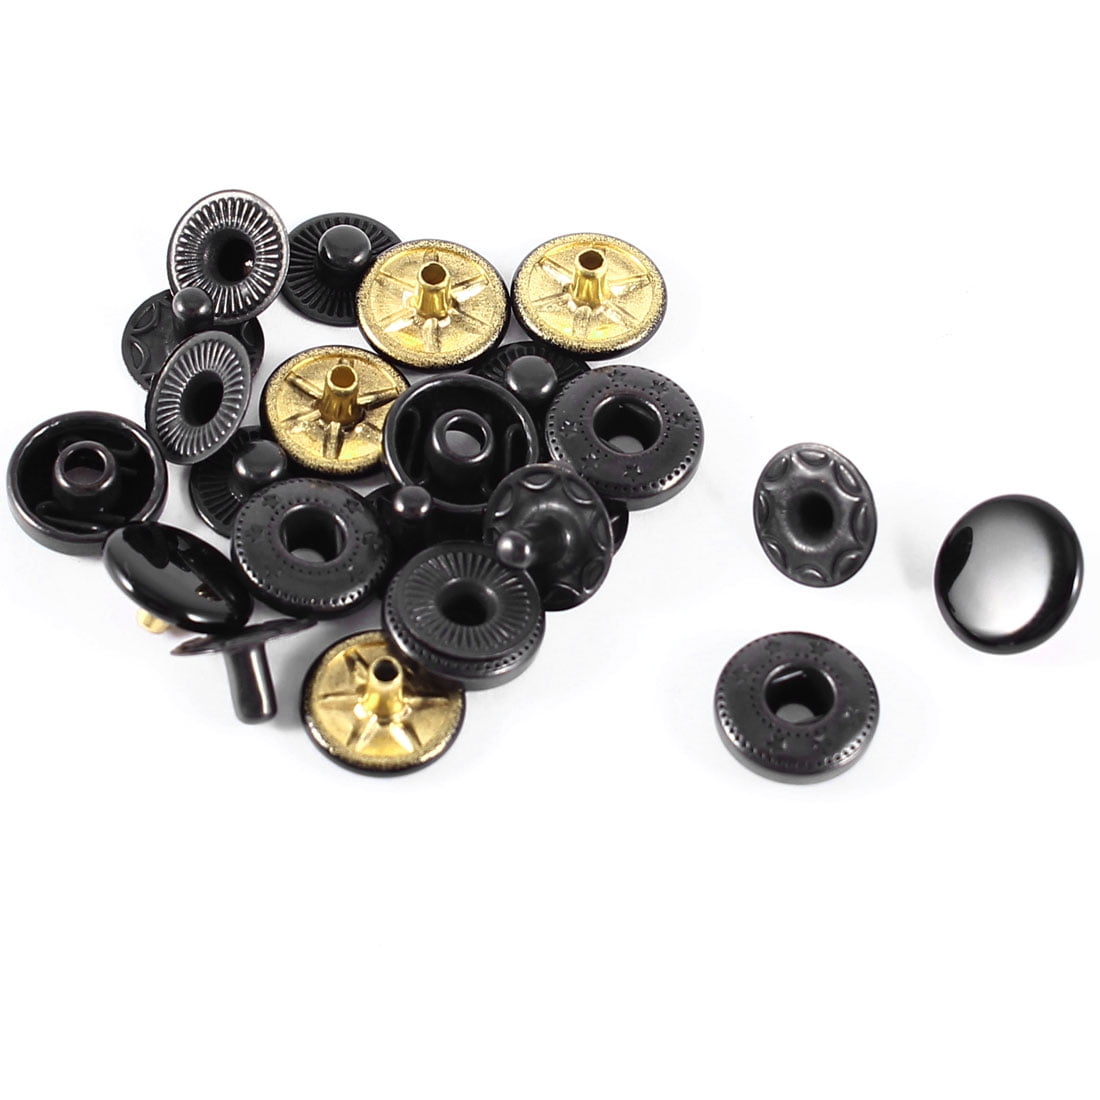 Unique Bargains 6 Sets Snap Fasteners Press Studs Sewing Buttons 10mm ...